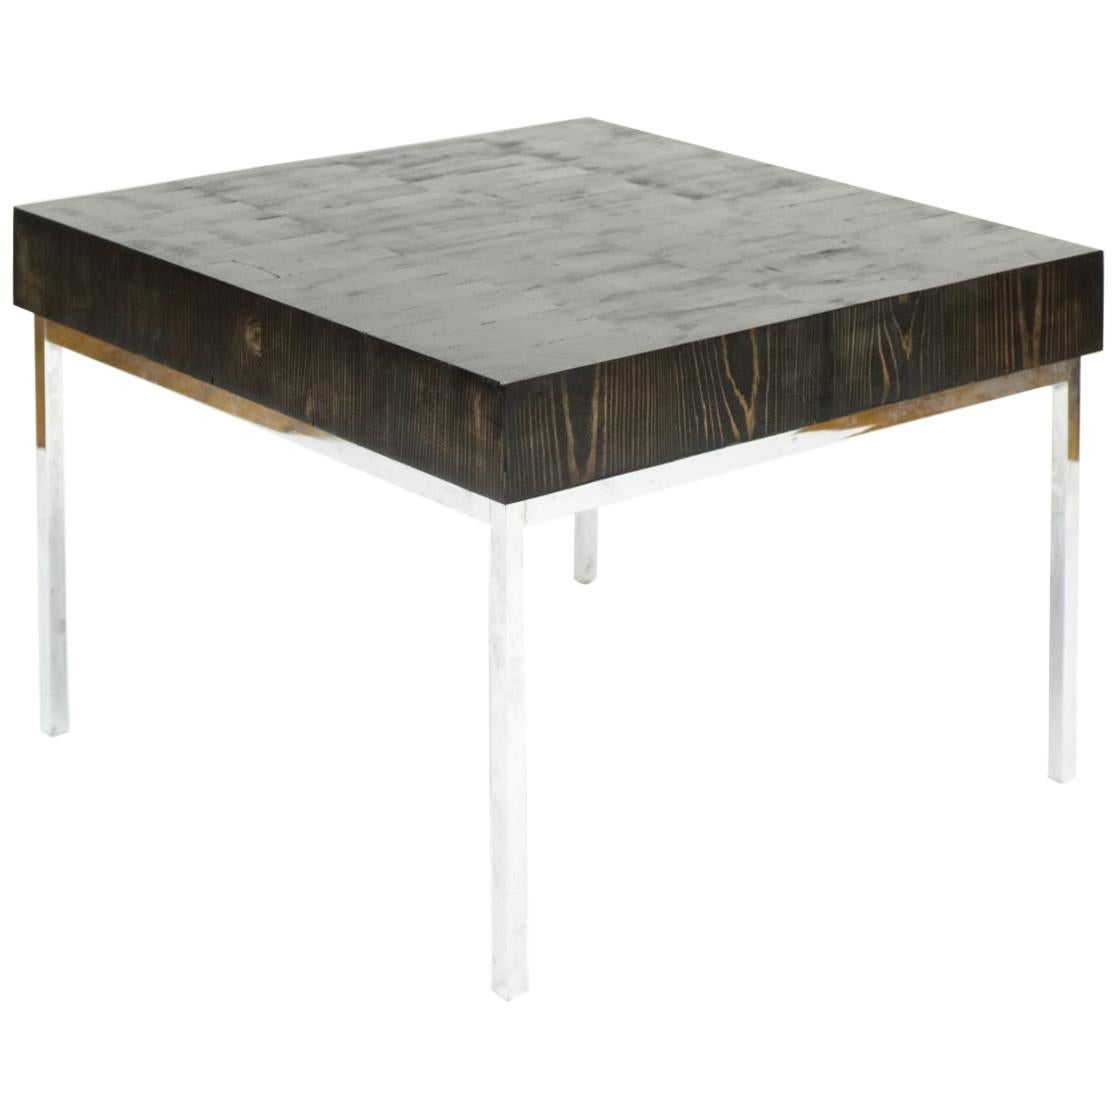 Cerussed Black Coffee Table with Stainless Steel Base Modern Minimal End Grain